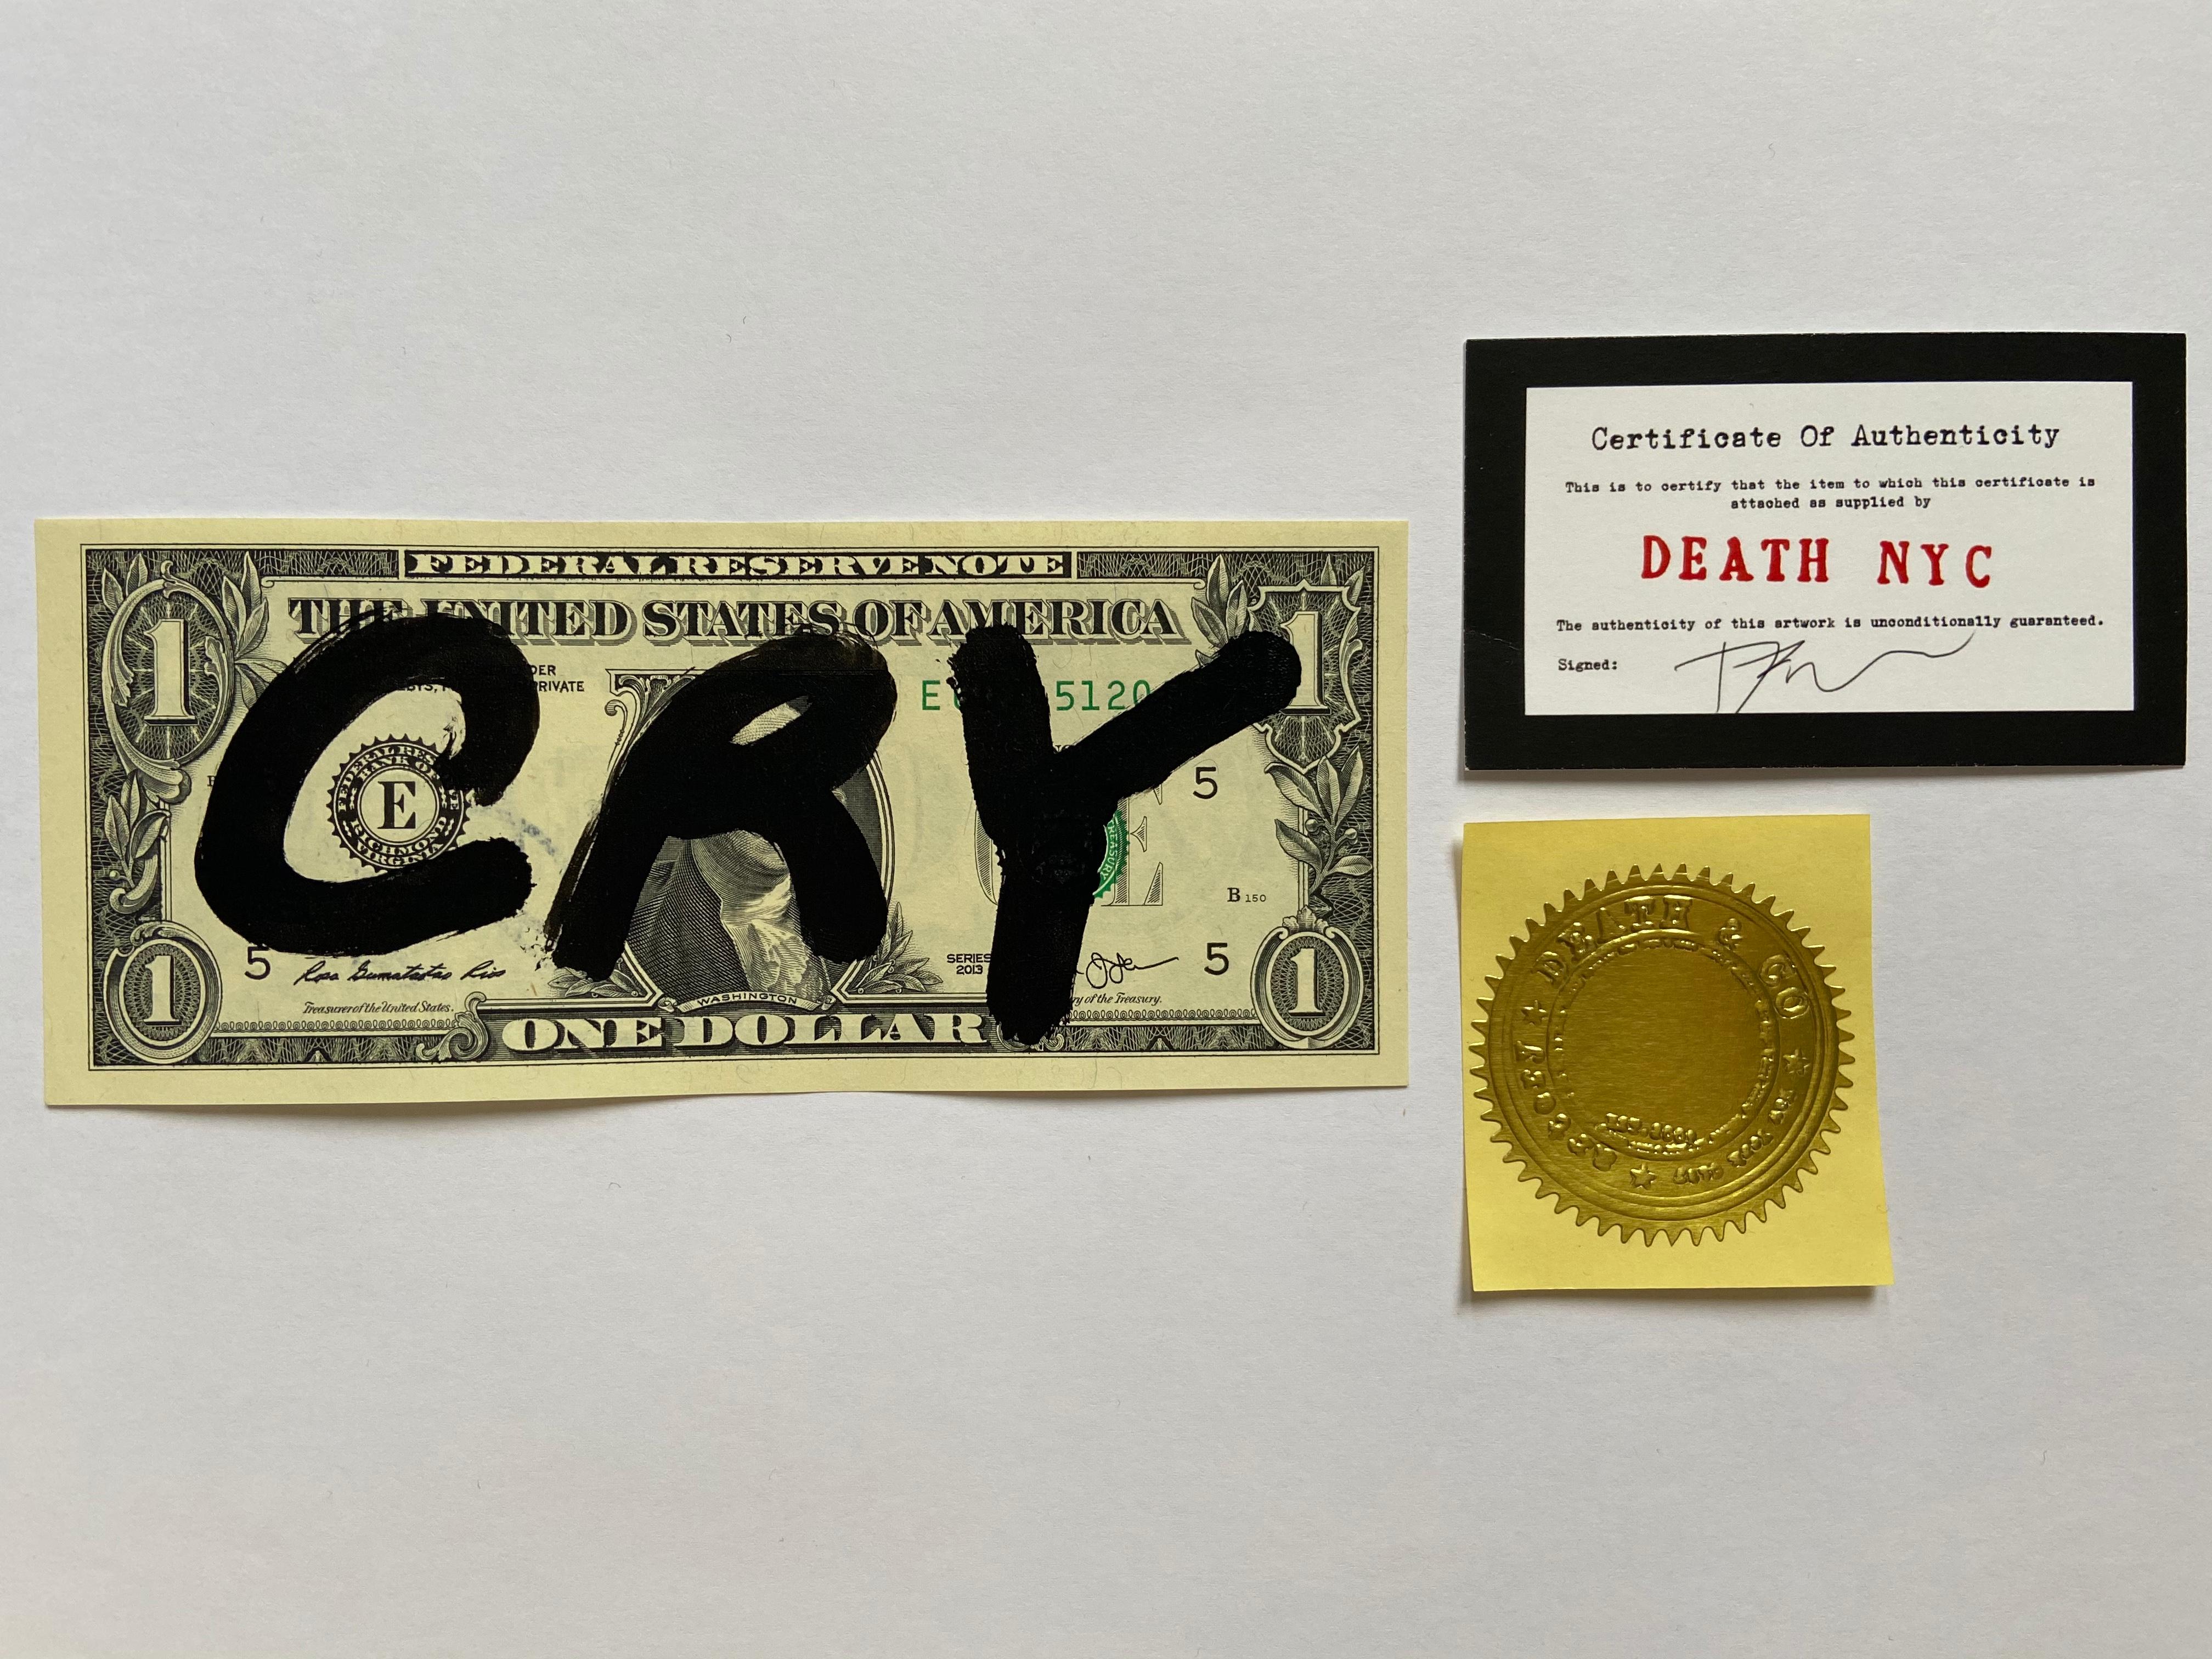 Death NYC CRY 2017
Gluing on 1 dollar notes
Signed by the artist
Size: 7 x 15.5 cm
Original copy, delivered with certificate of authenticity and stamp of the artist
Perfect condition 
99 euros